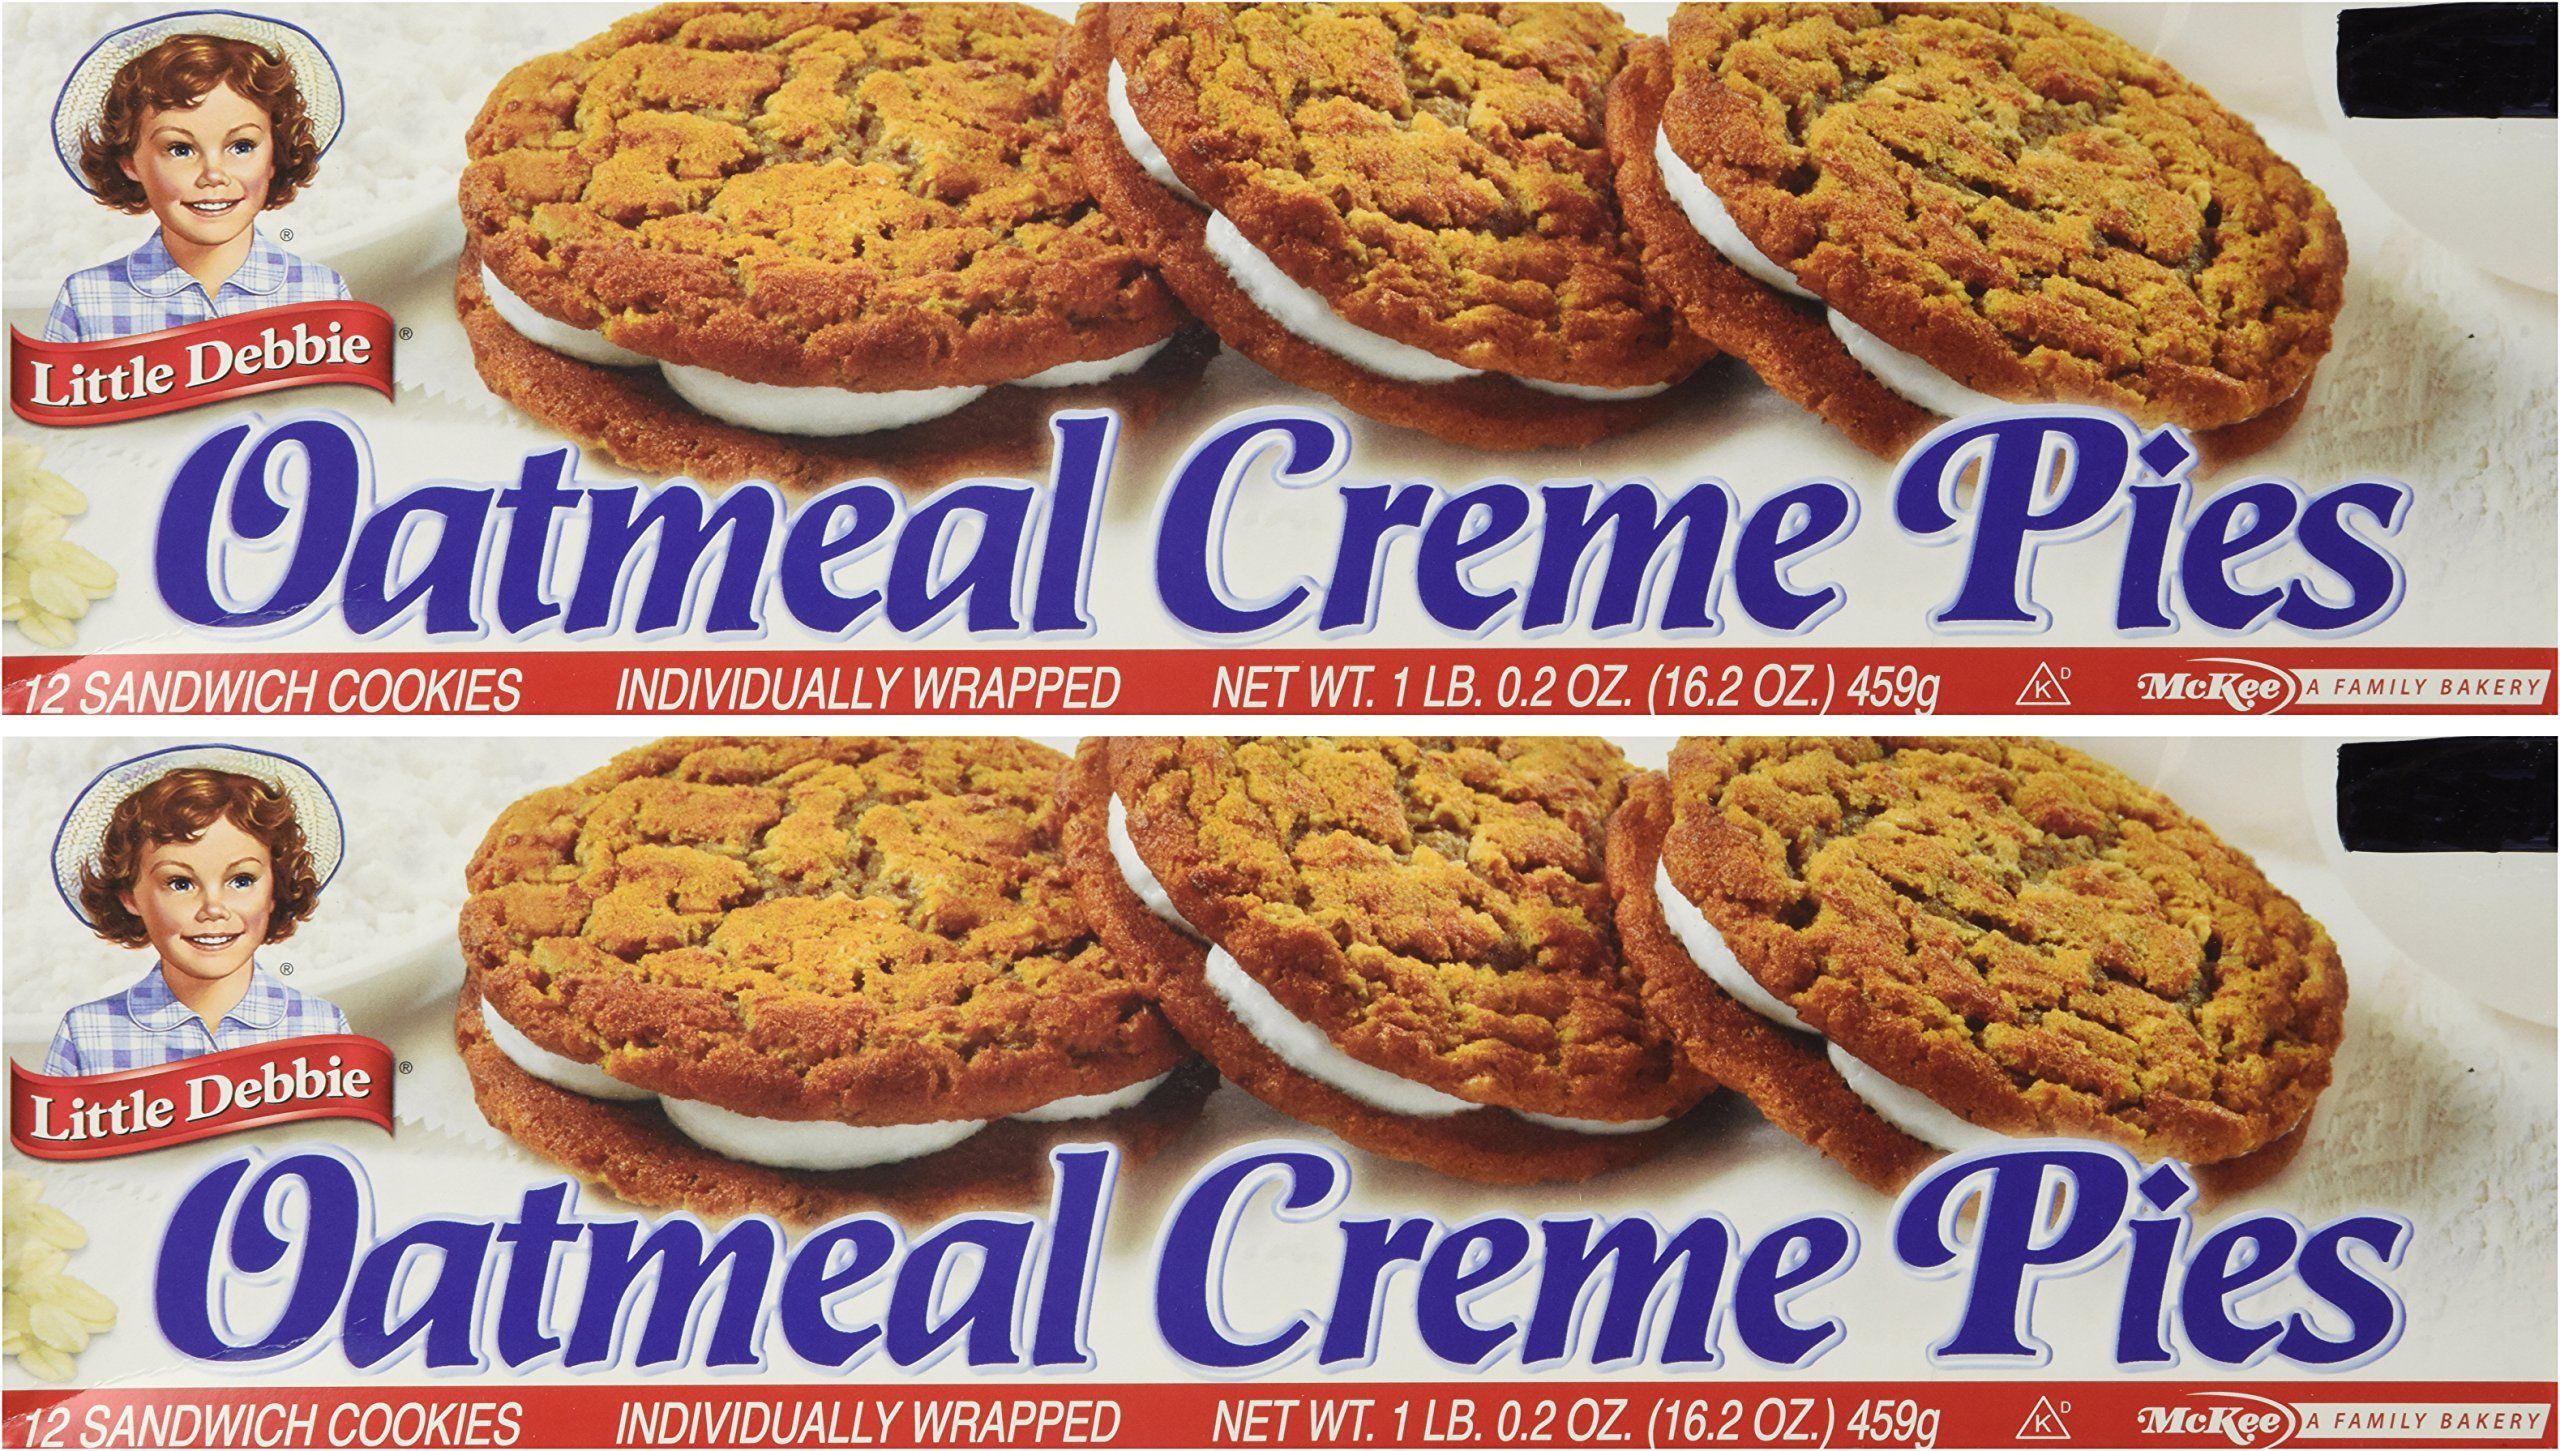 Oatmeal Creme Pies Logo - Little Debbie Oatmeal Creme Pies, 24 Count: Amazon.com: Grocery ...